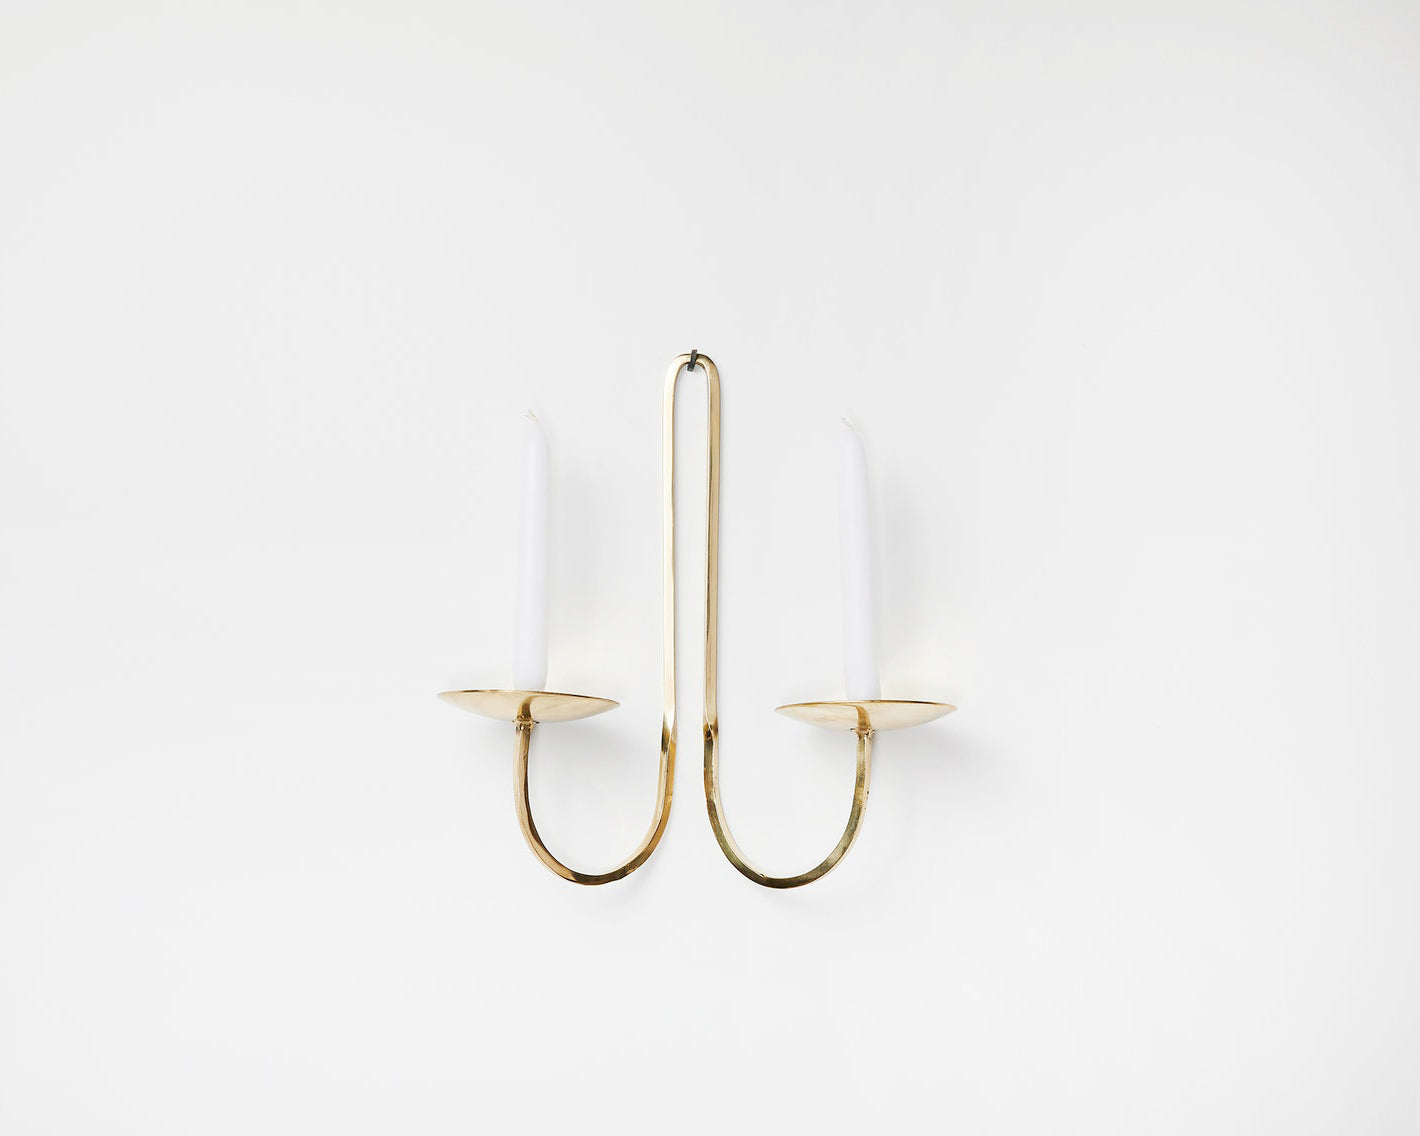 Fredericks & Mae Brass Arm Candle Holders